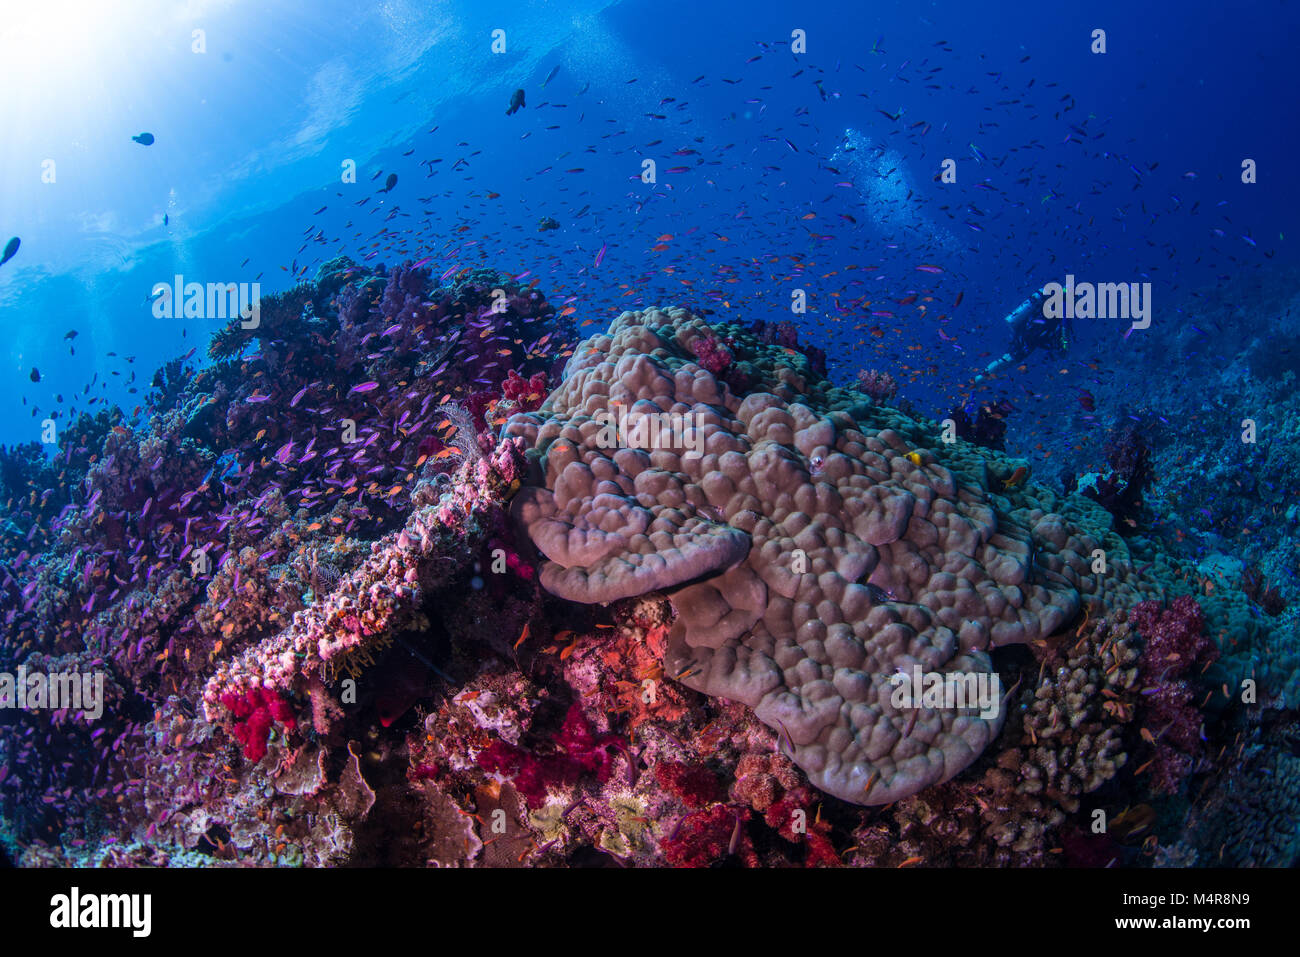 Anathias swimming over hard corals in Fiji with divers Stock Photo